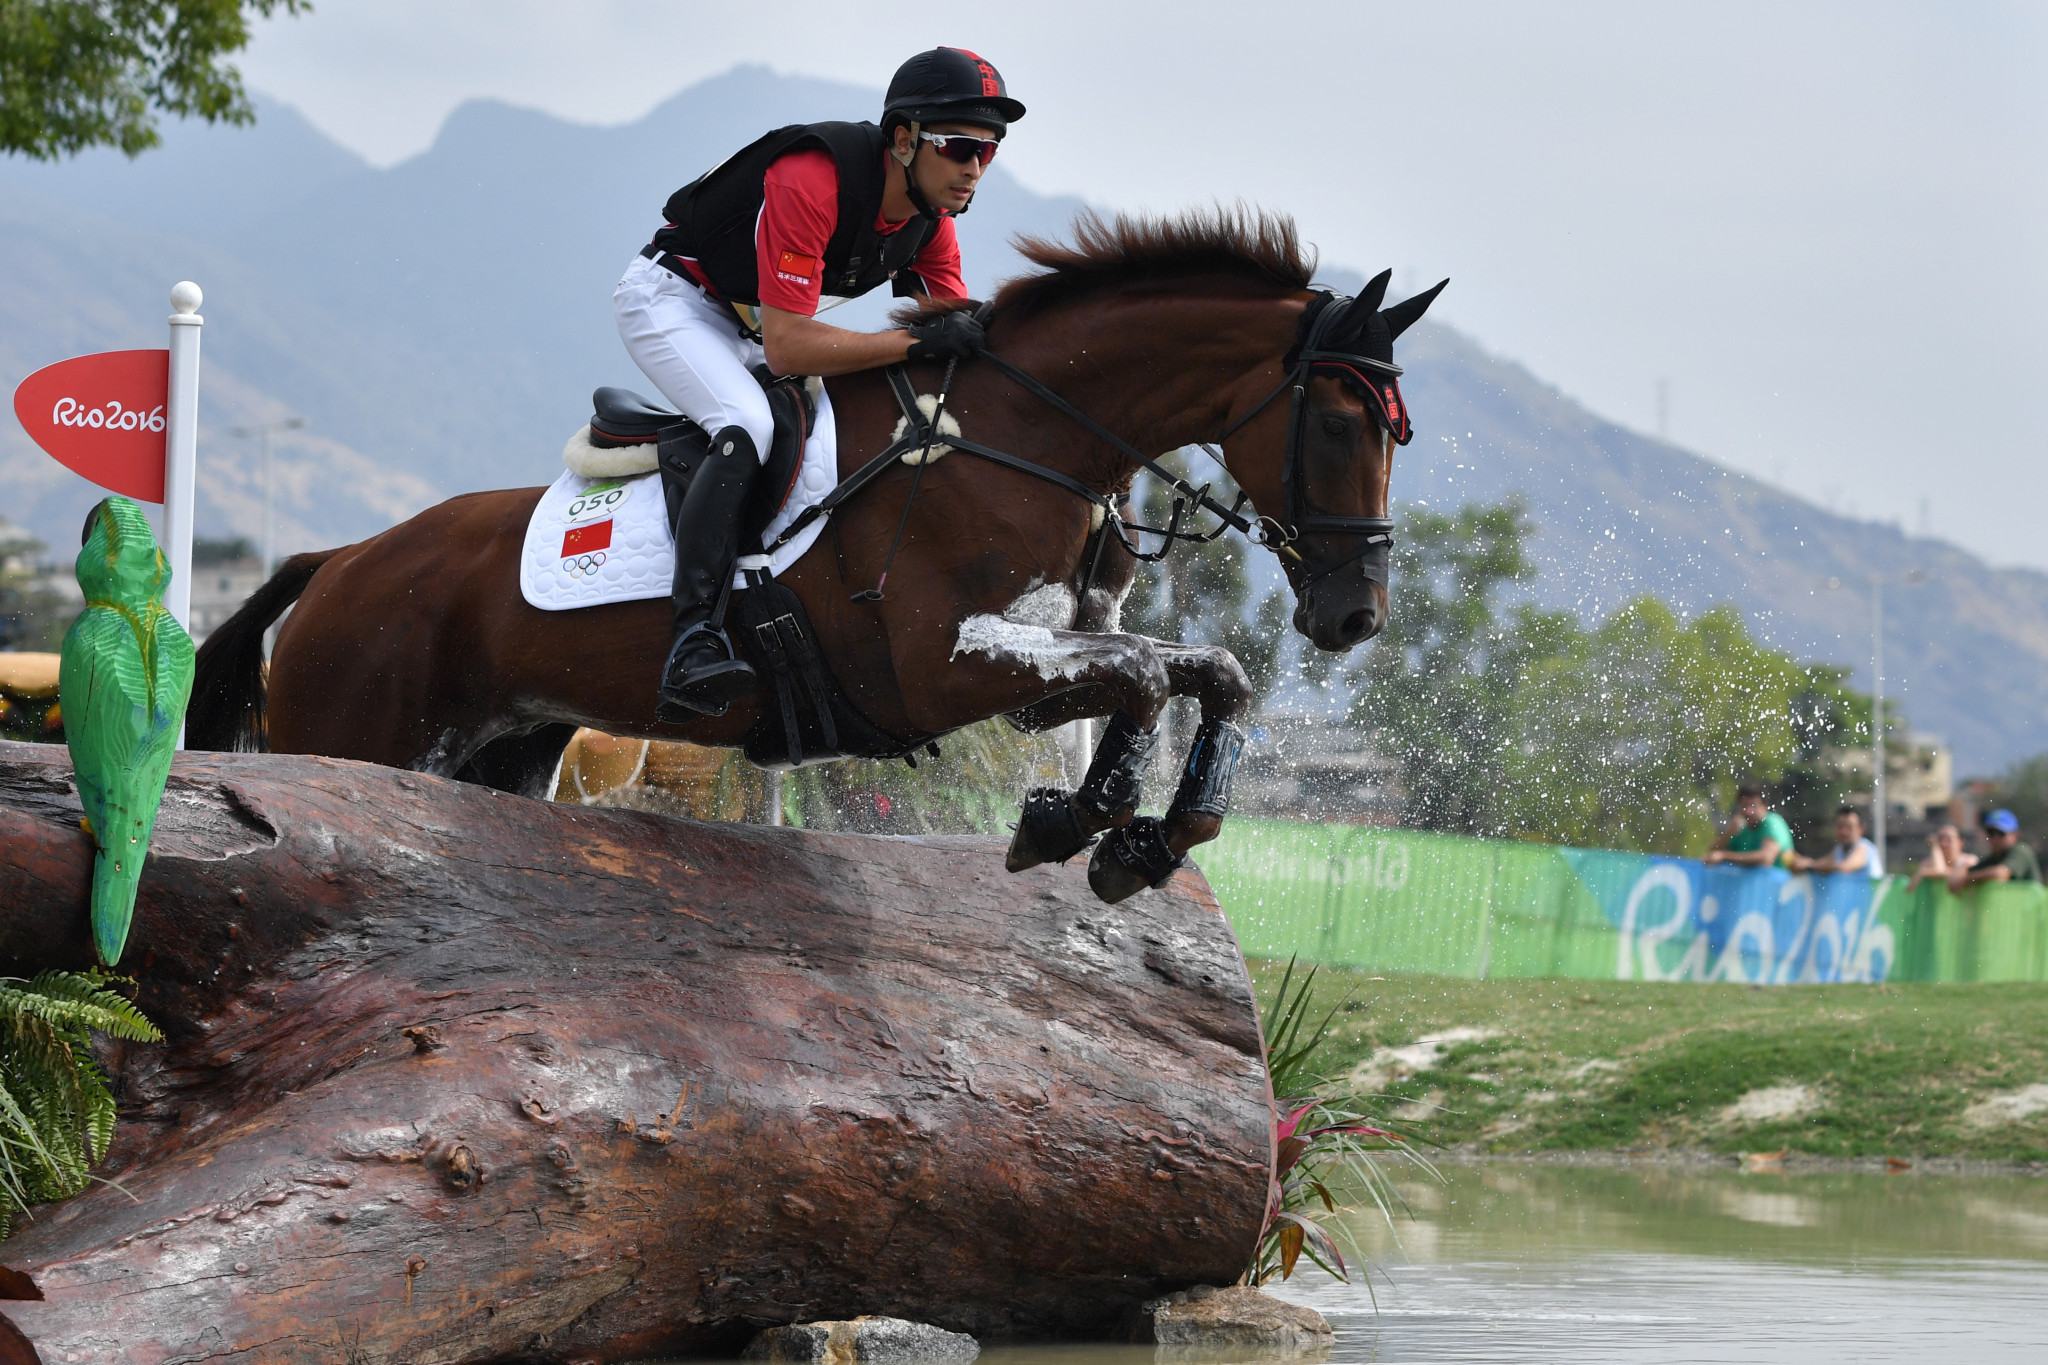 Alex Hua Tian represented China in eventing at the Rio 2016 Olympics ©Getty Images